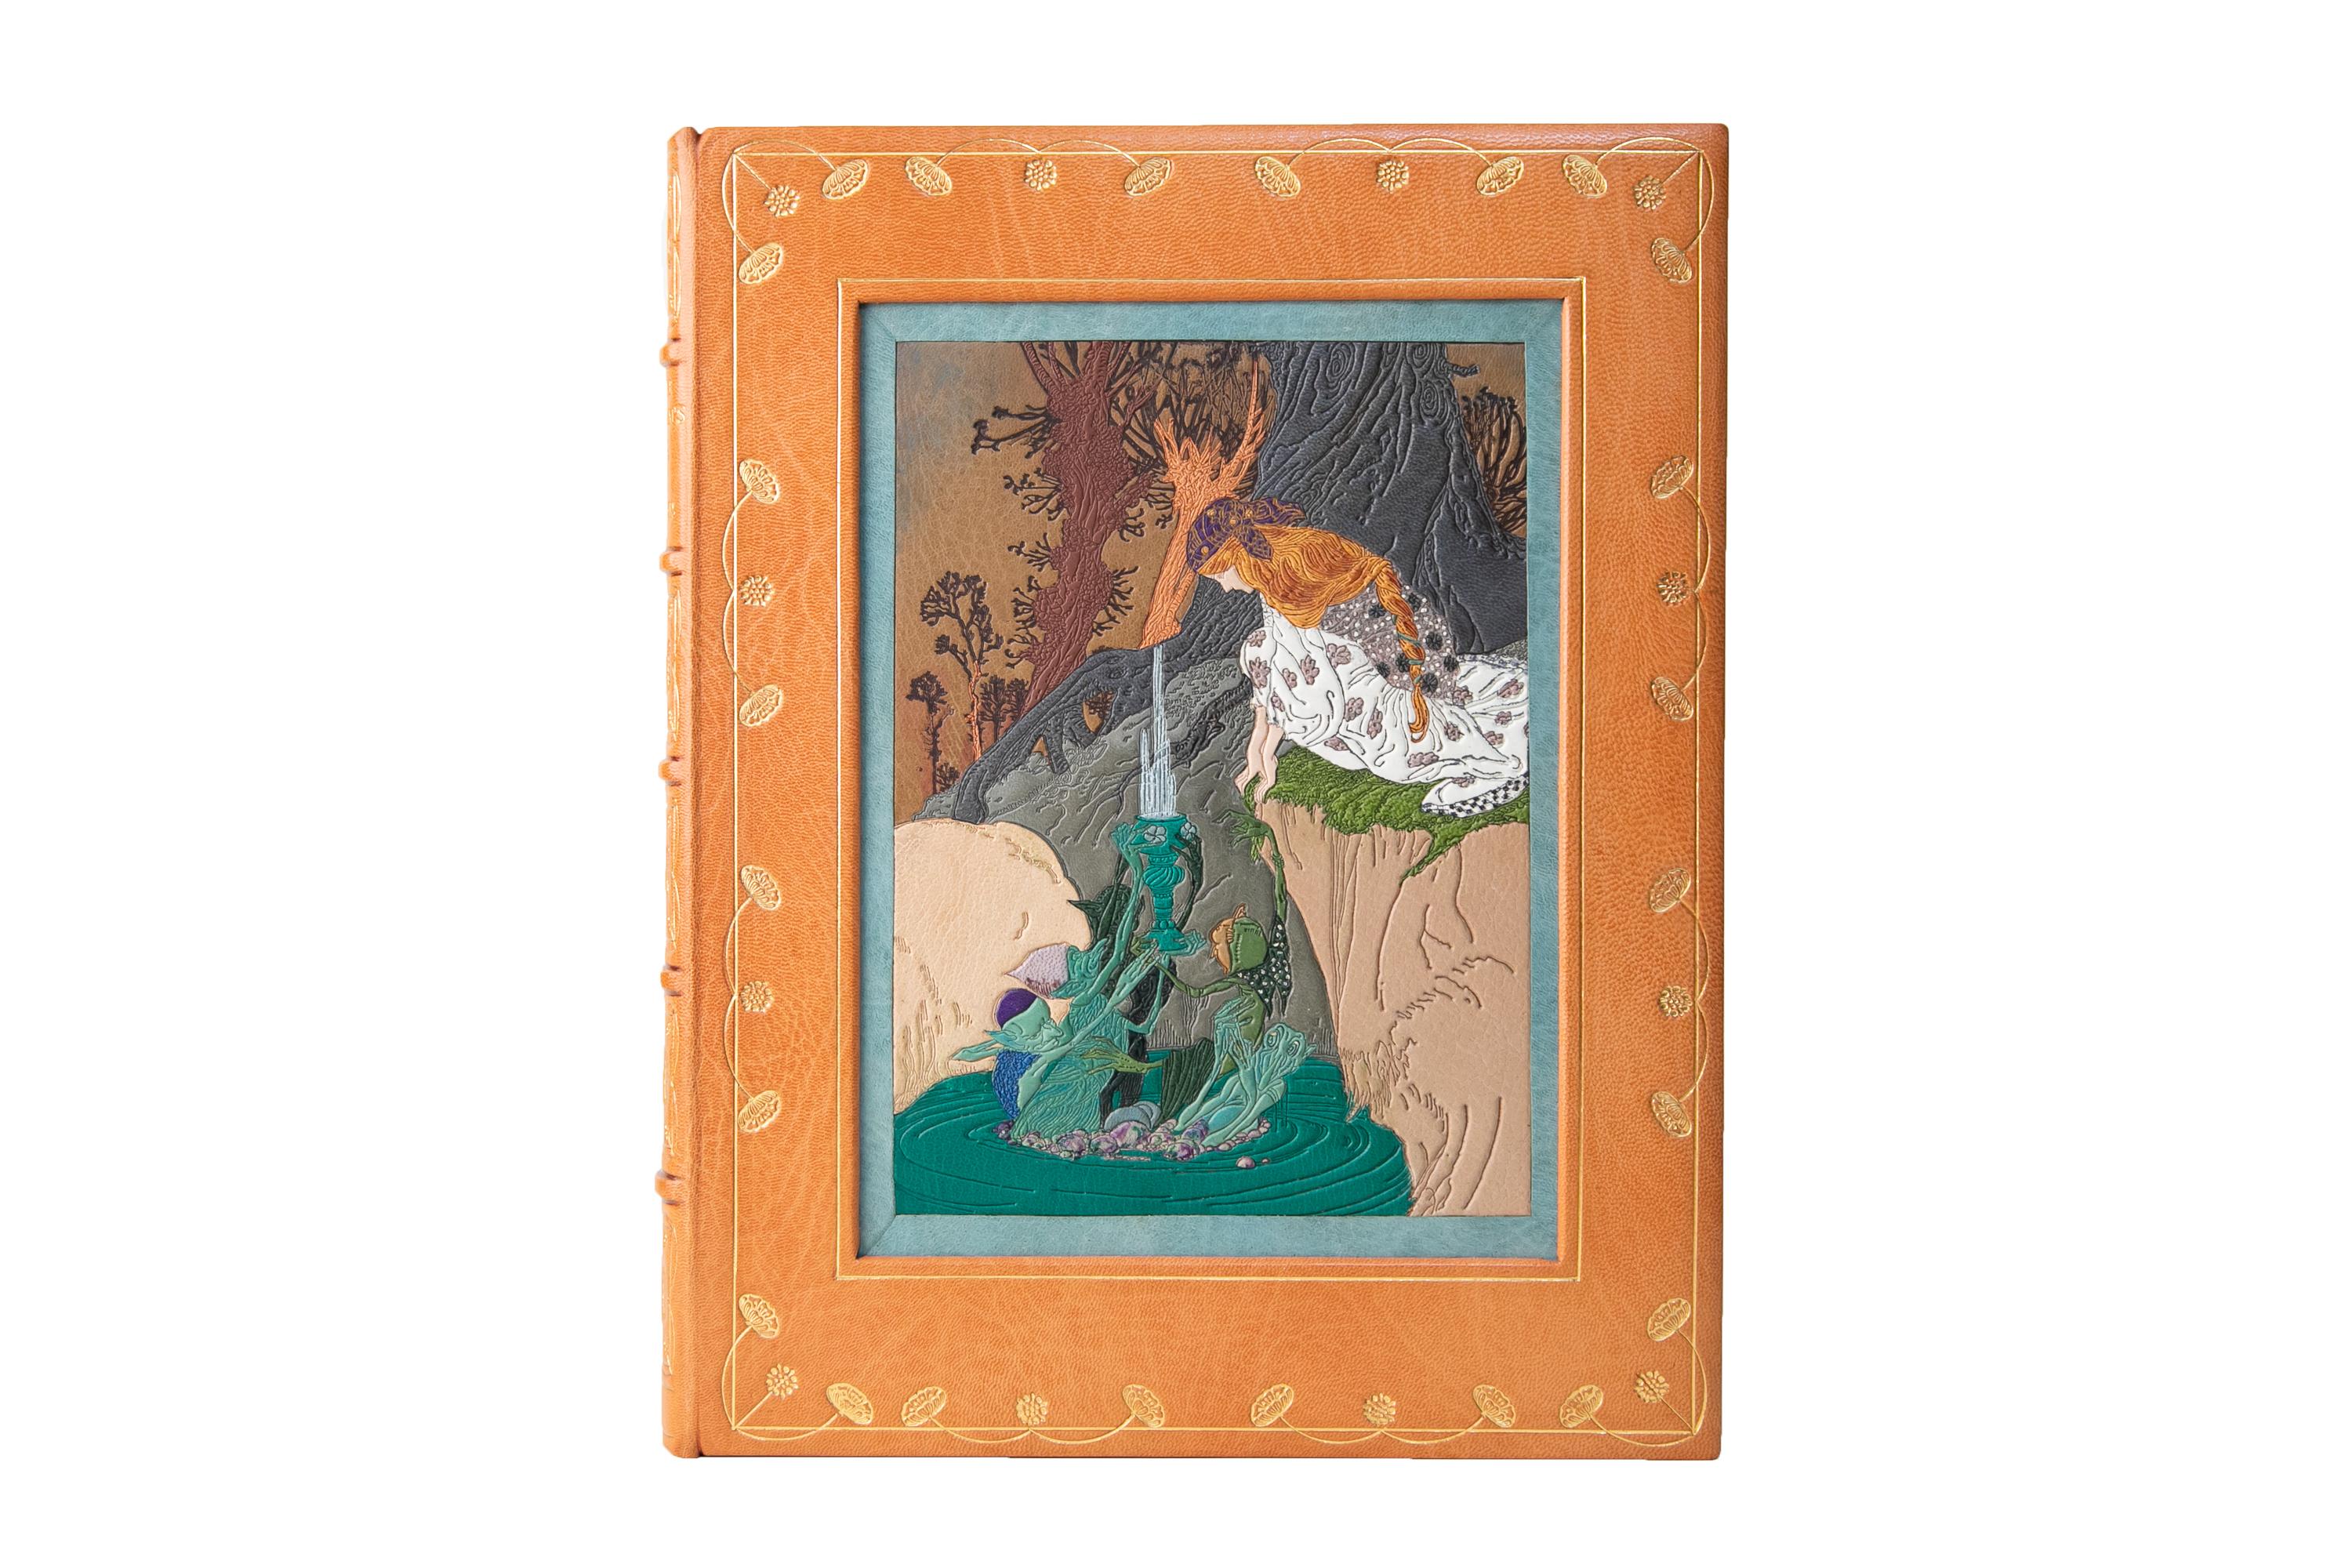 1 Volume. Arthur Rackham, Book of Pictures. Signed Limited Edition. Bound by Sangorski & Sutcliffe in full orange morocco. The cover displays a scene depicting a woman by the riverside being handed a challis by trolls in multi-colored inlay with a